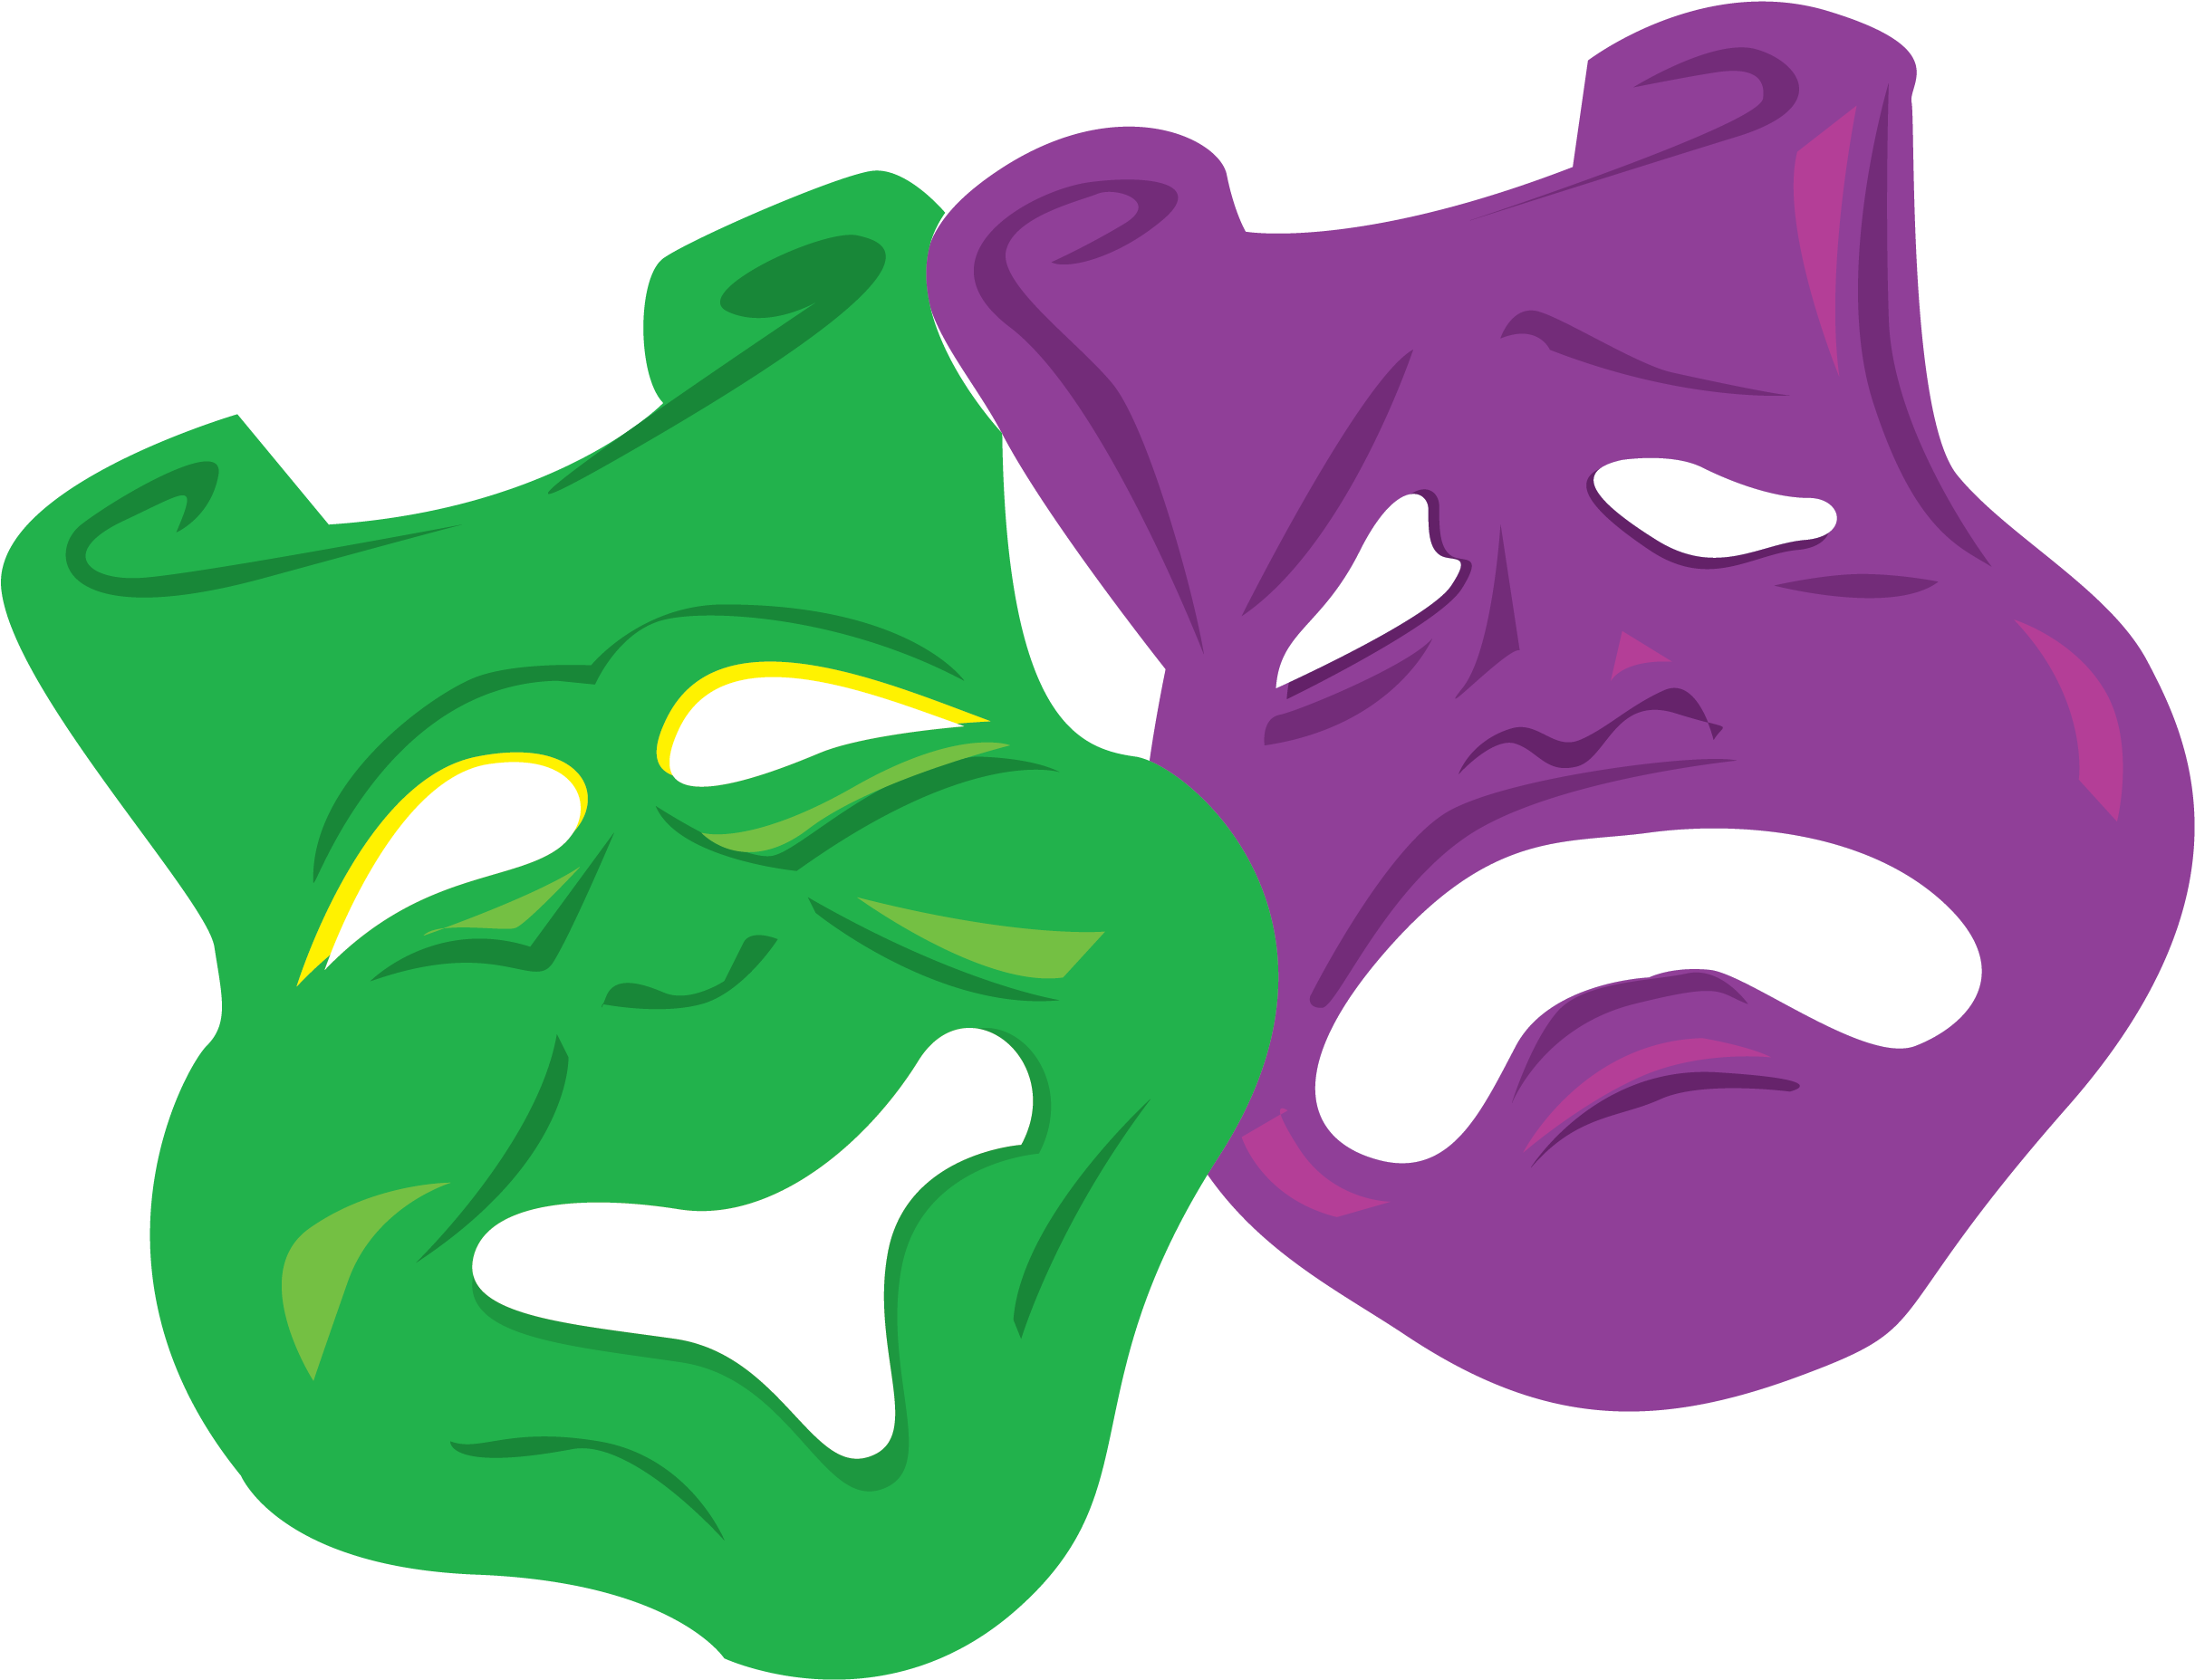 Download and share clipart about Mardi Gras Mask Clip Art - Mask, Find more...